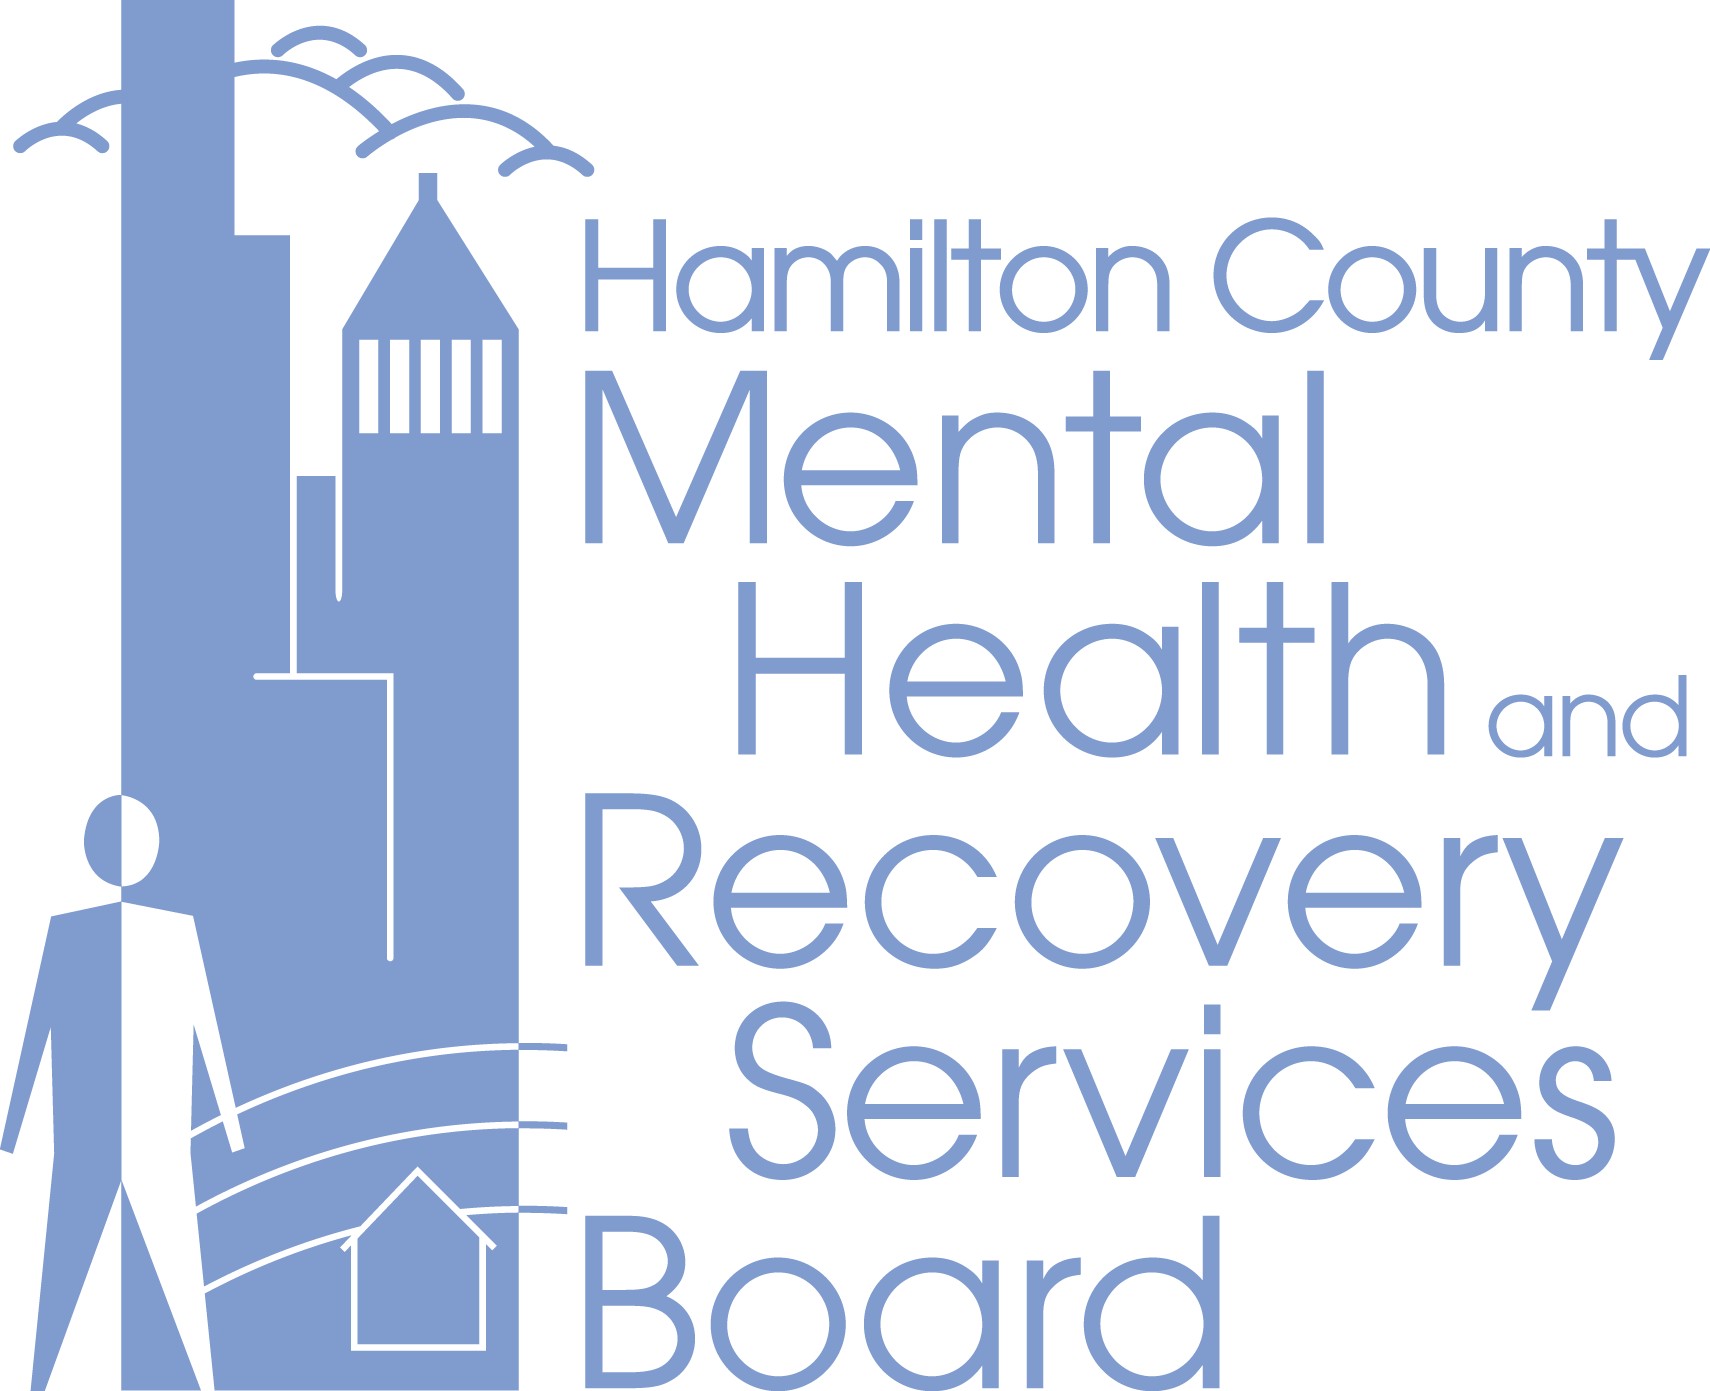 Hamilton County Mental Health and Recovery Services Board